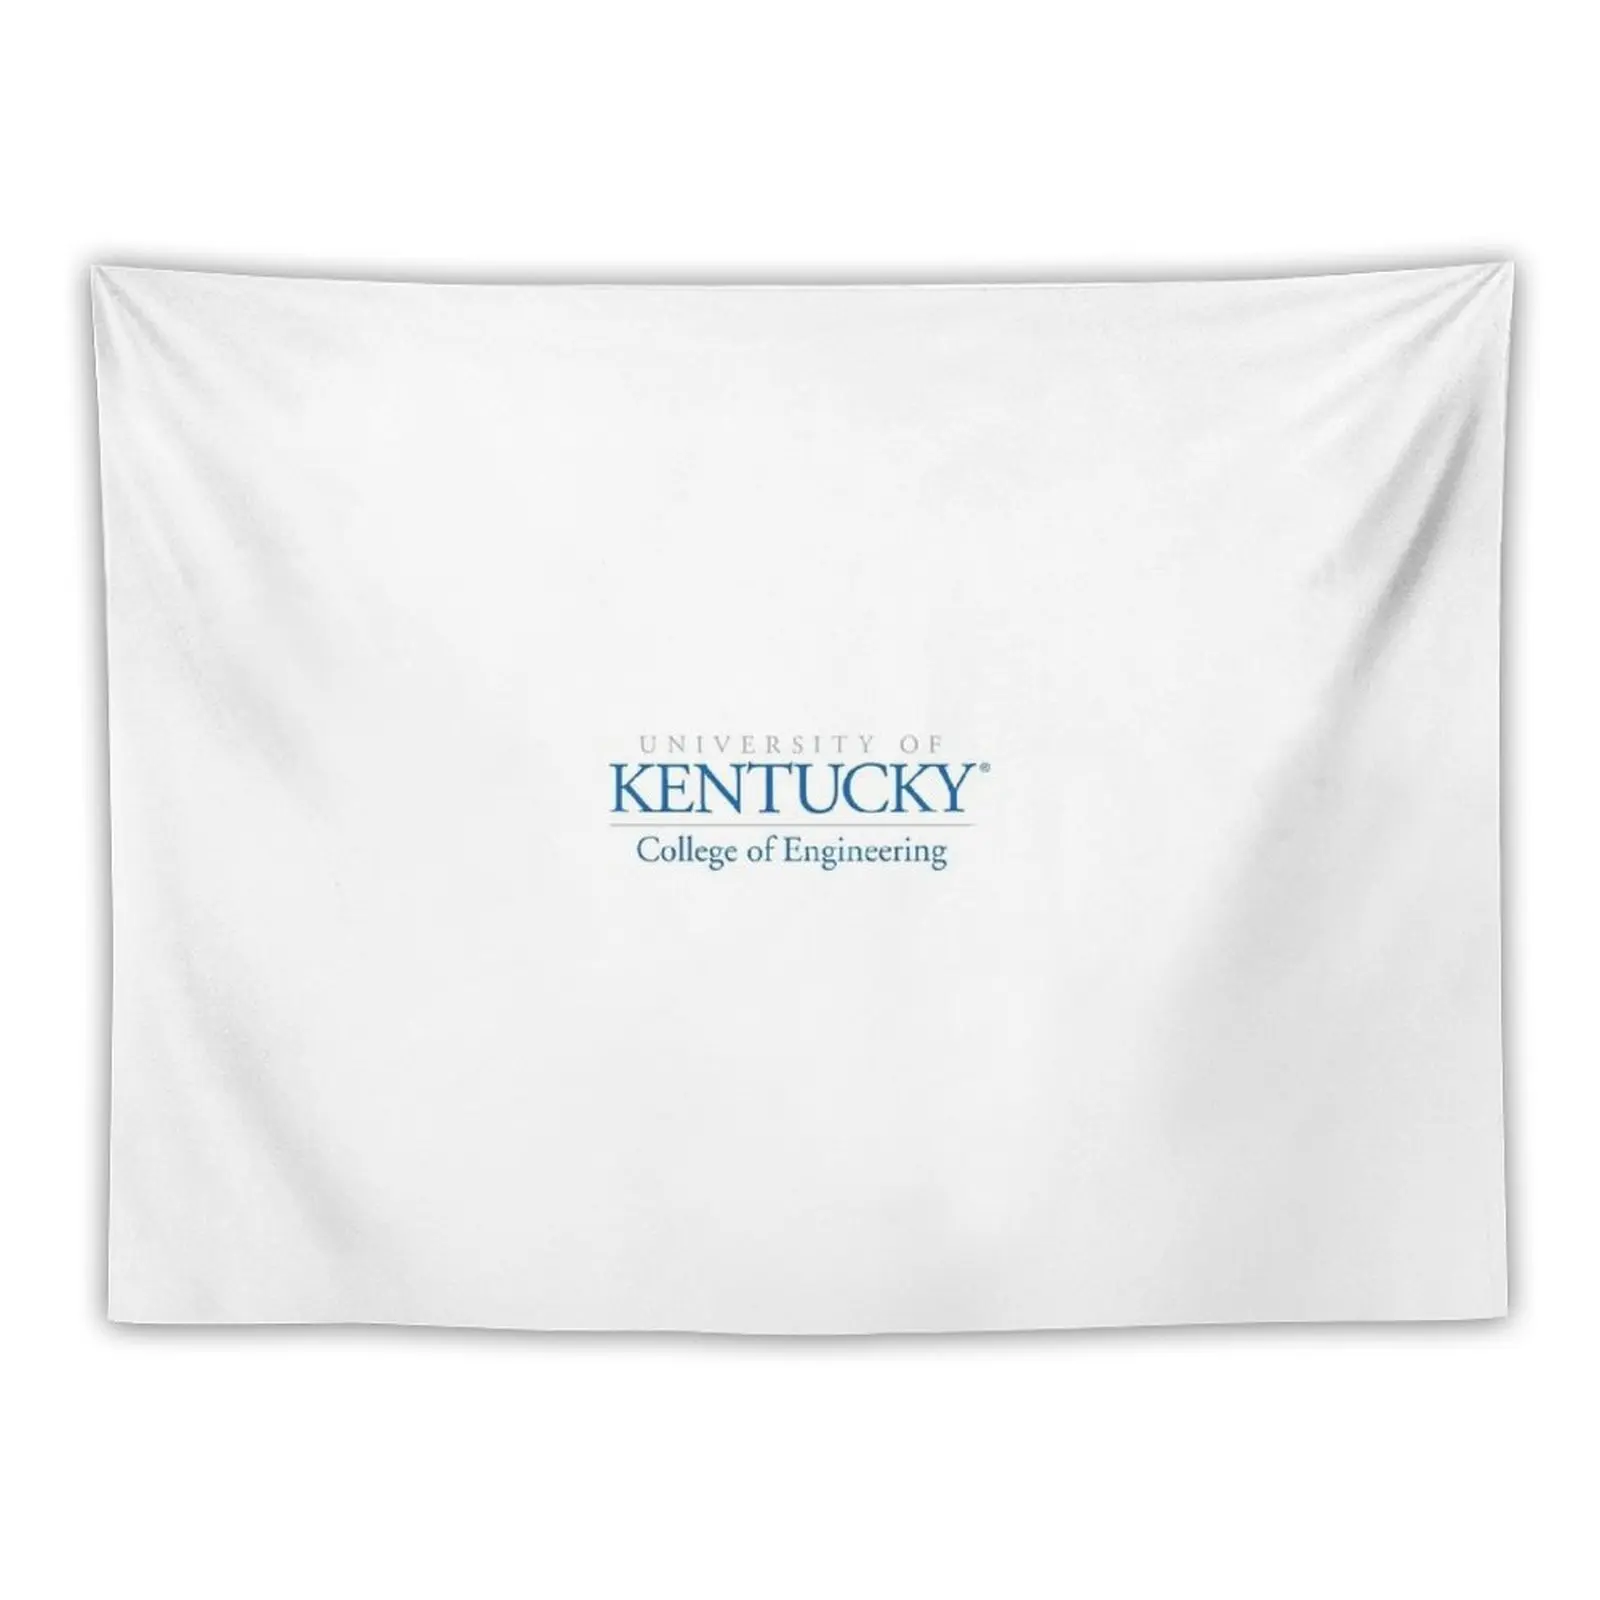 

University of Kentucky College of Engineering Tapestry House Decoration Cute Tapestry Carpet On The Wall